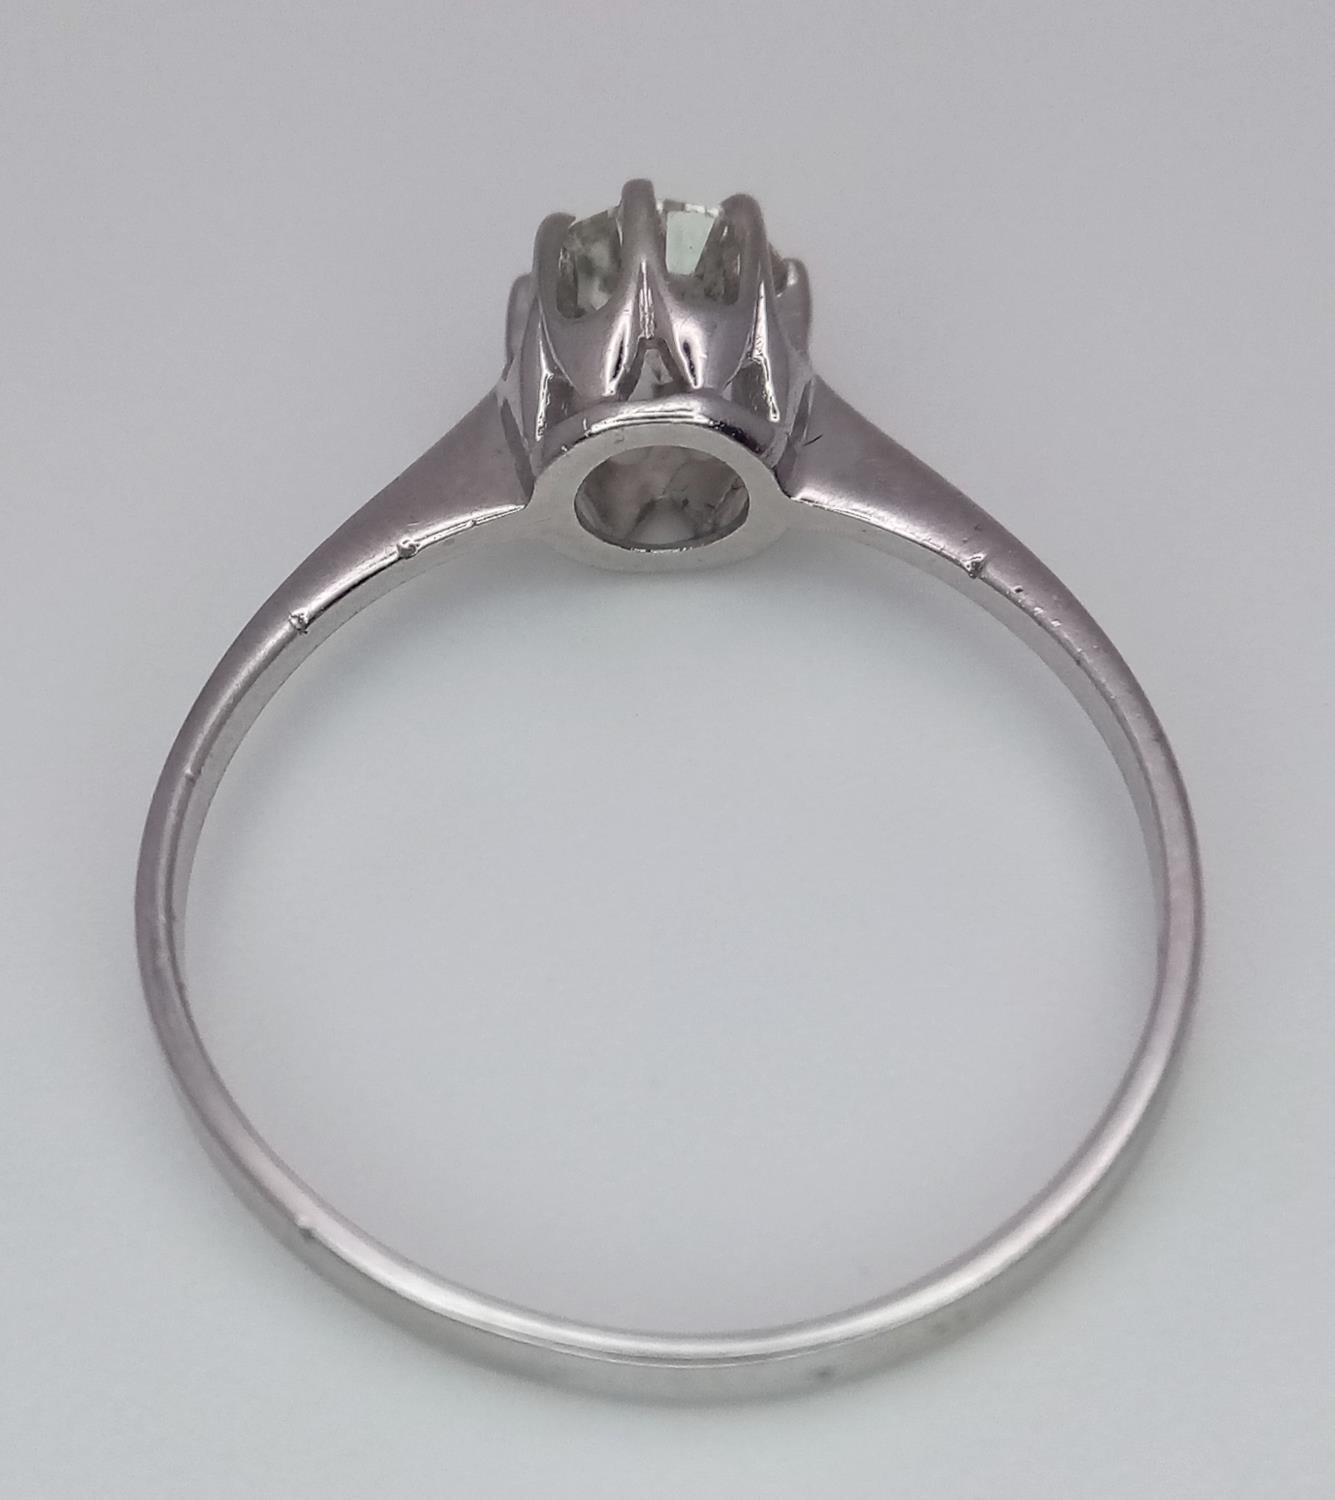 A 14K WHITE GOLD DIAMOND SOLITAIRE RING 0.33CT 1.5G SIZE O/P. BL 9001 - Image 4 of 5